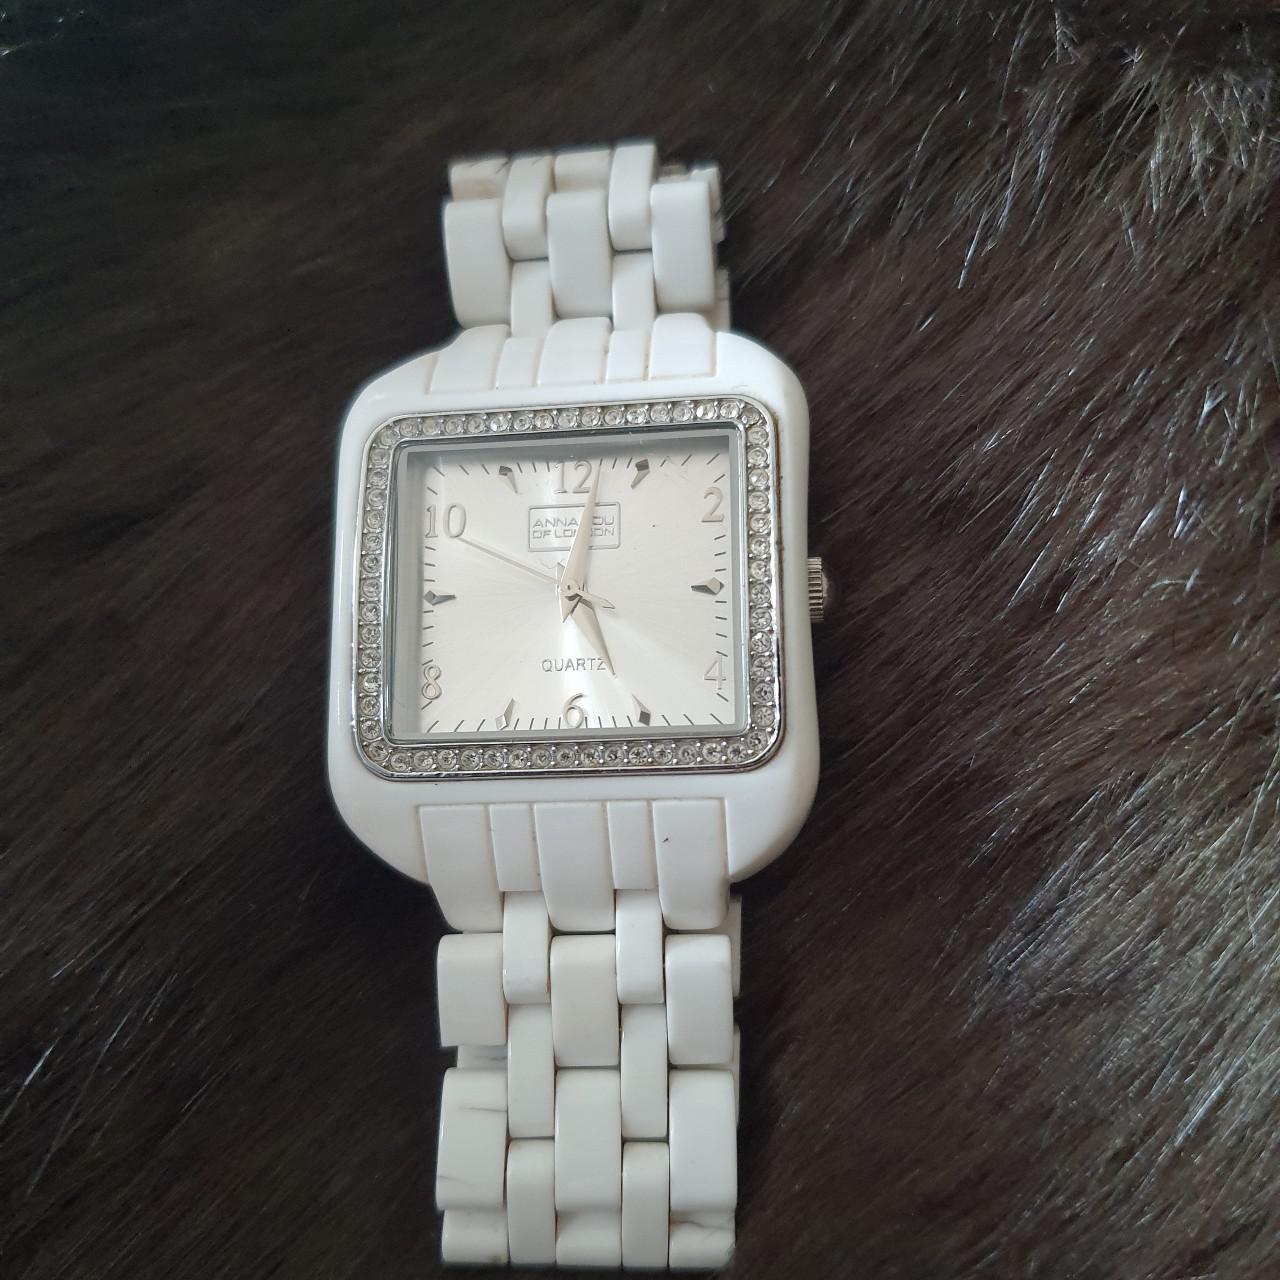 Product Image 2 - ANNA lou London white watch.
Needs